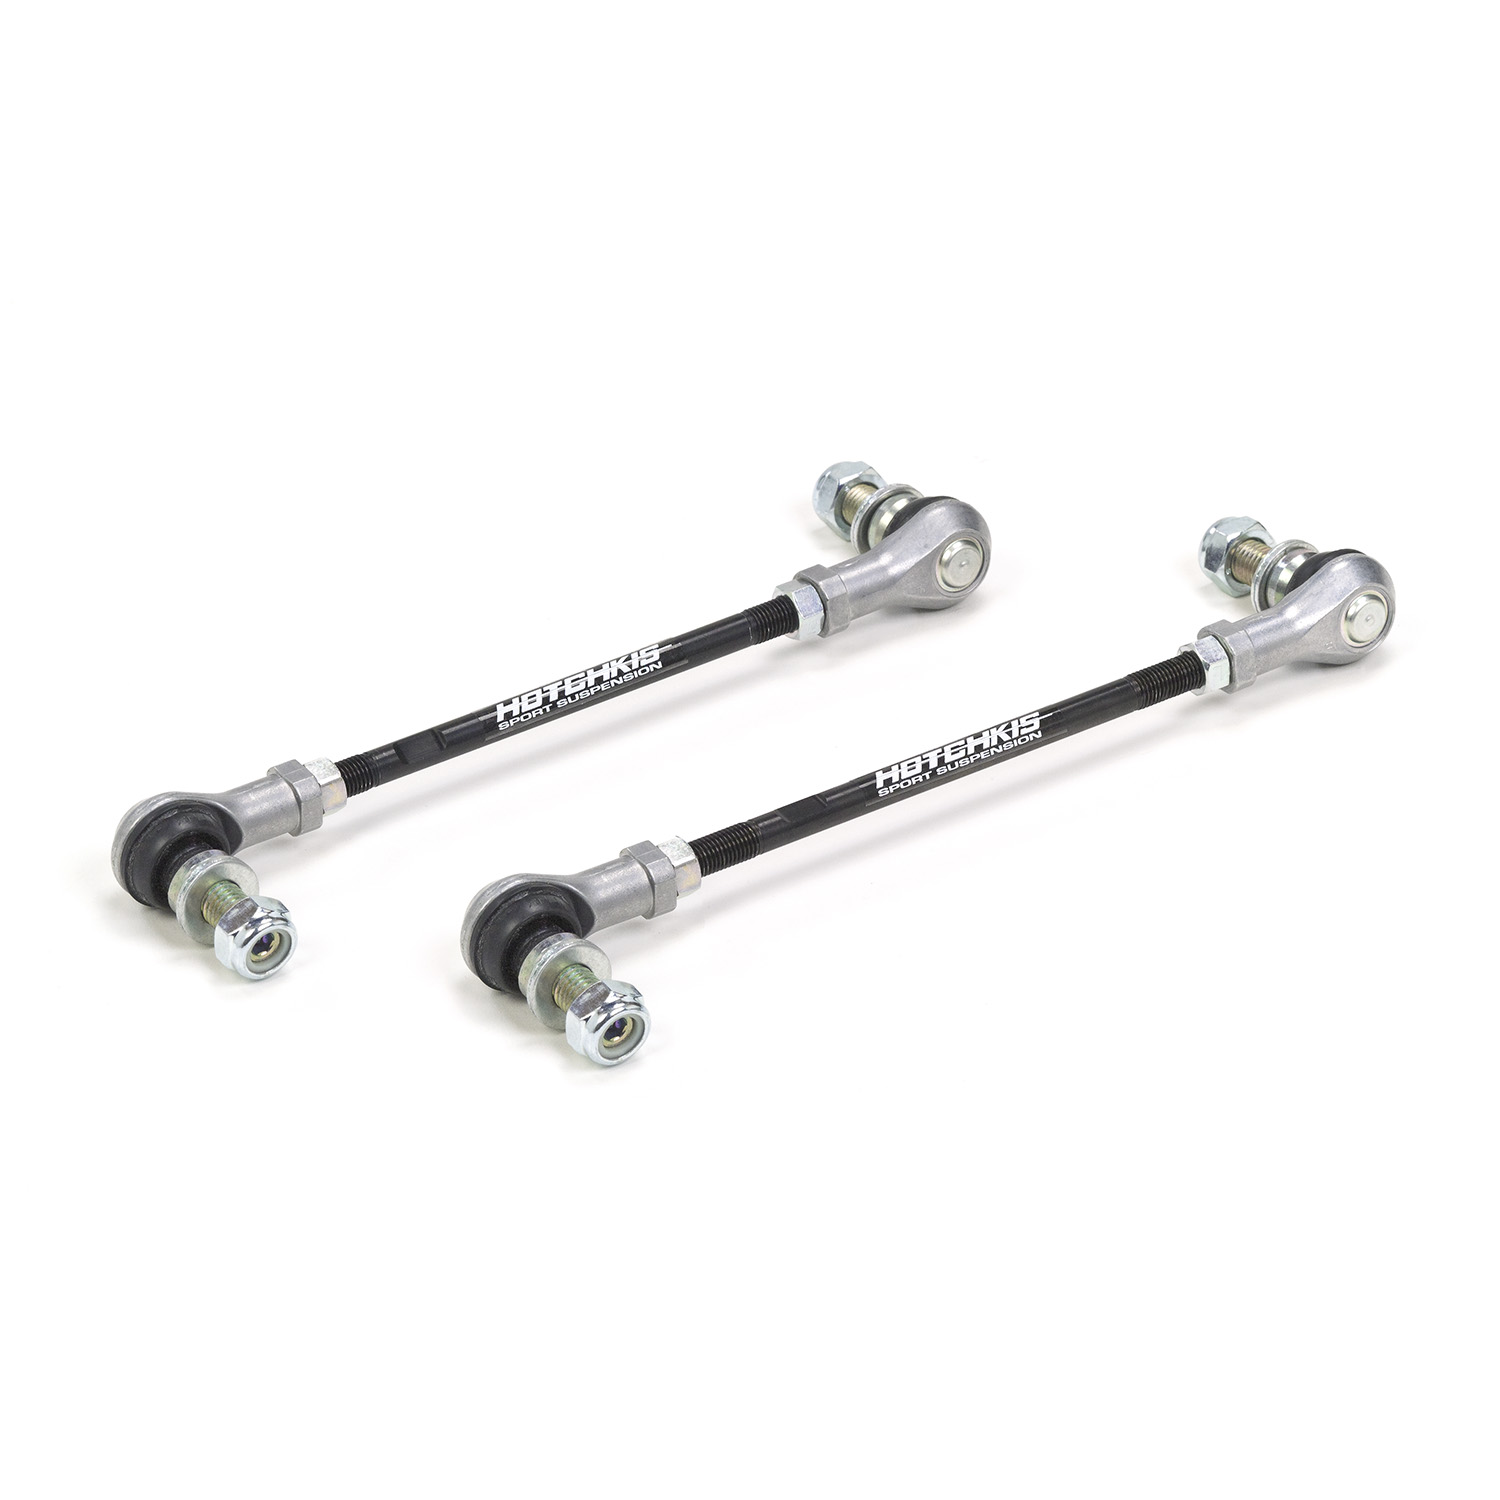 Hotchkis Rear end link set for 2013-2016 Scion FRS and 2013-2016 Subaru BRZ.